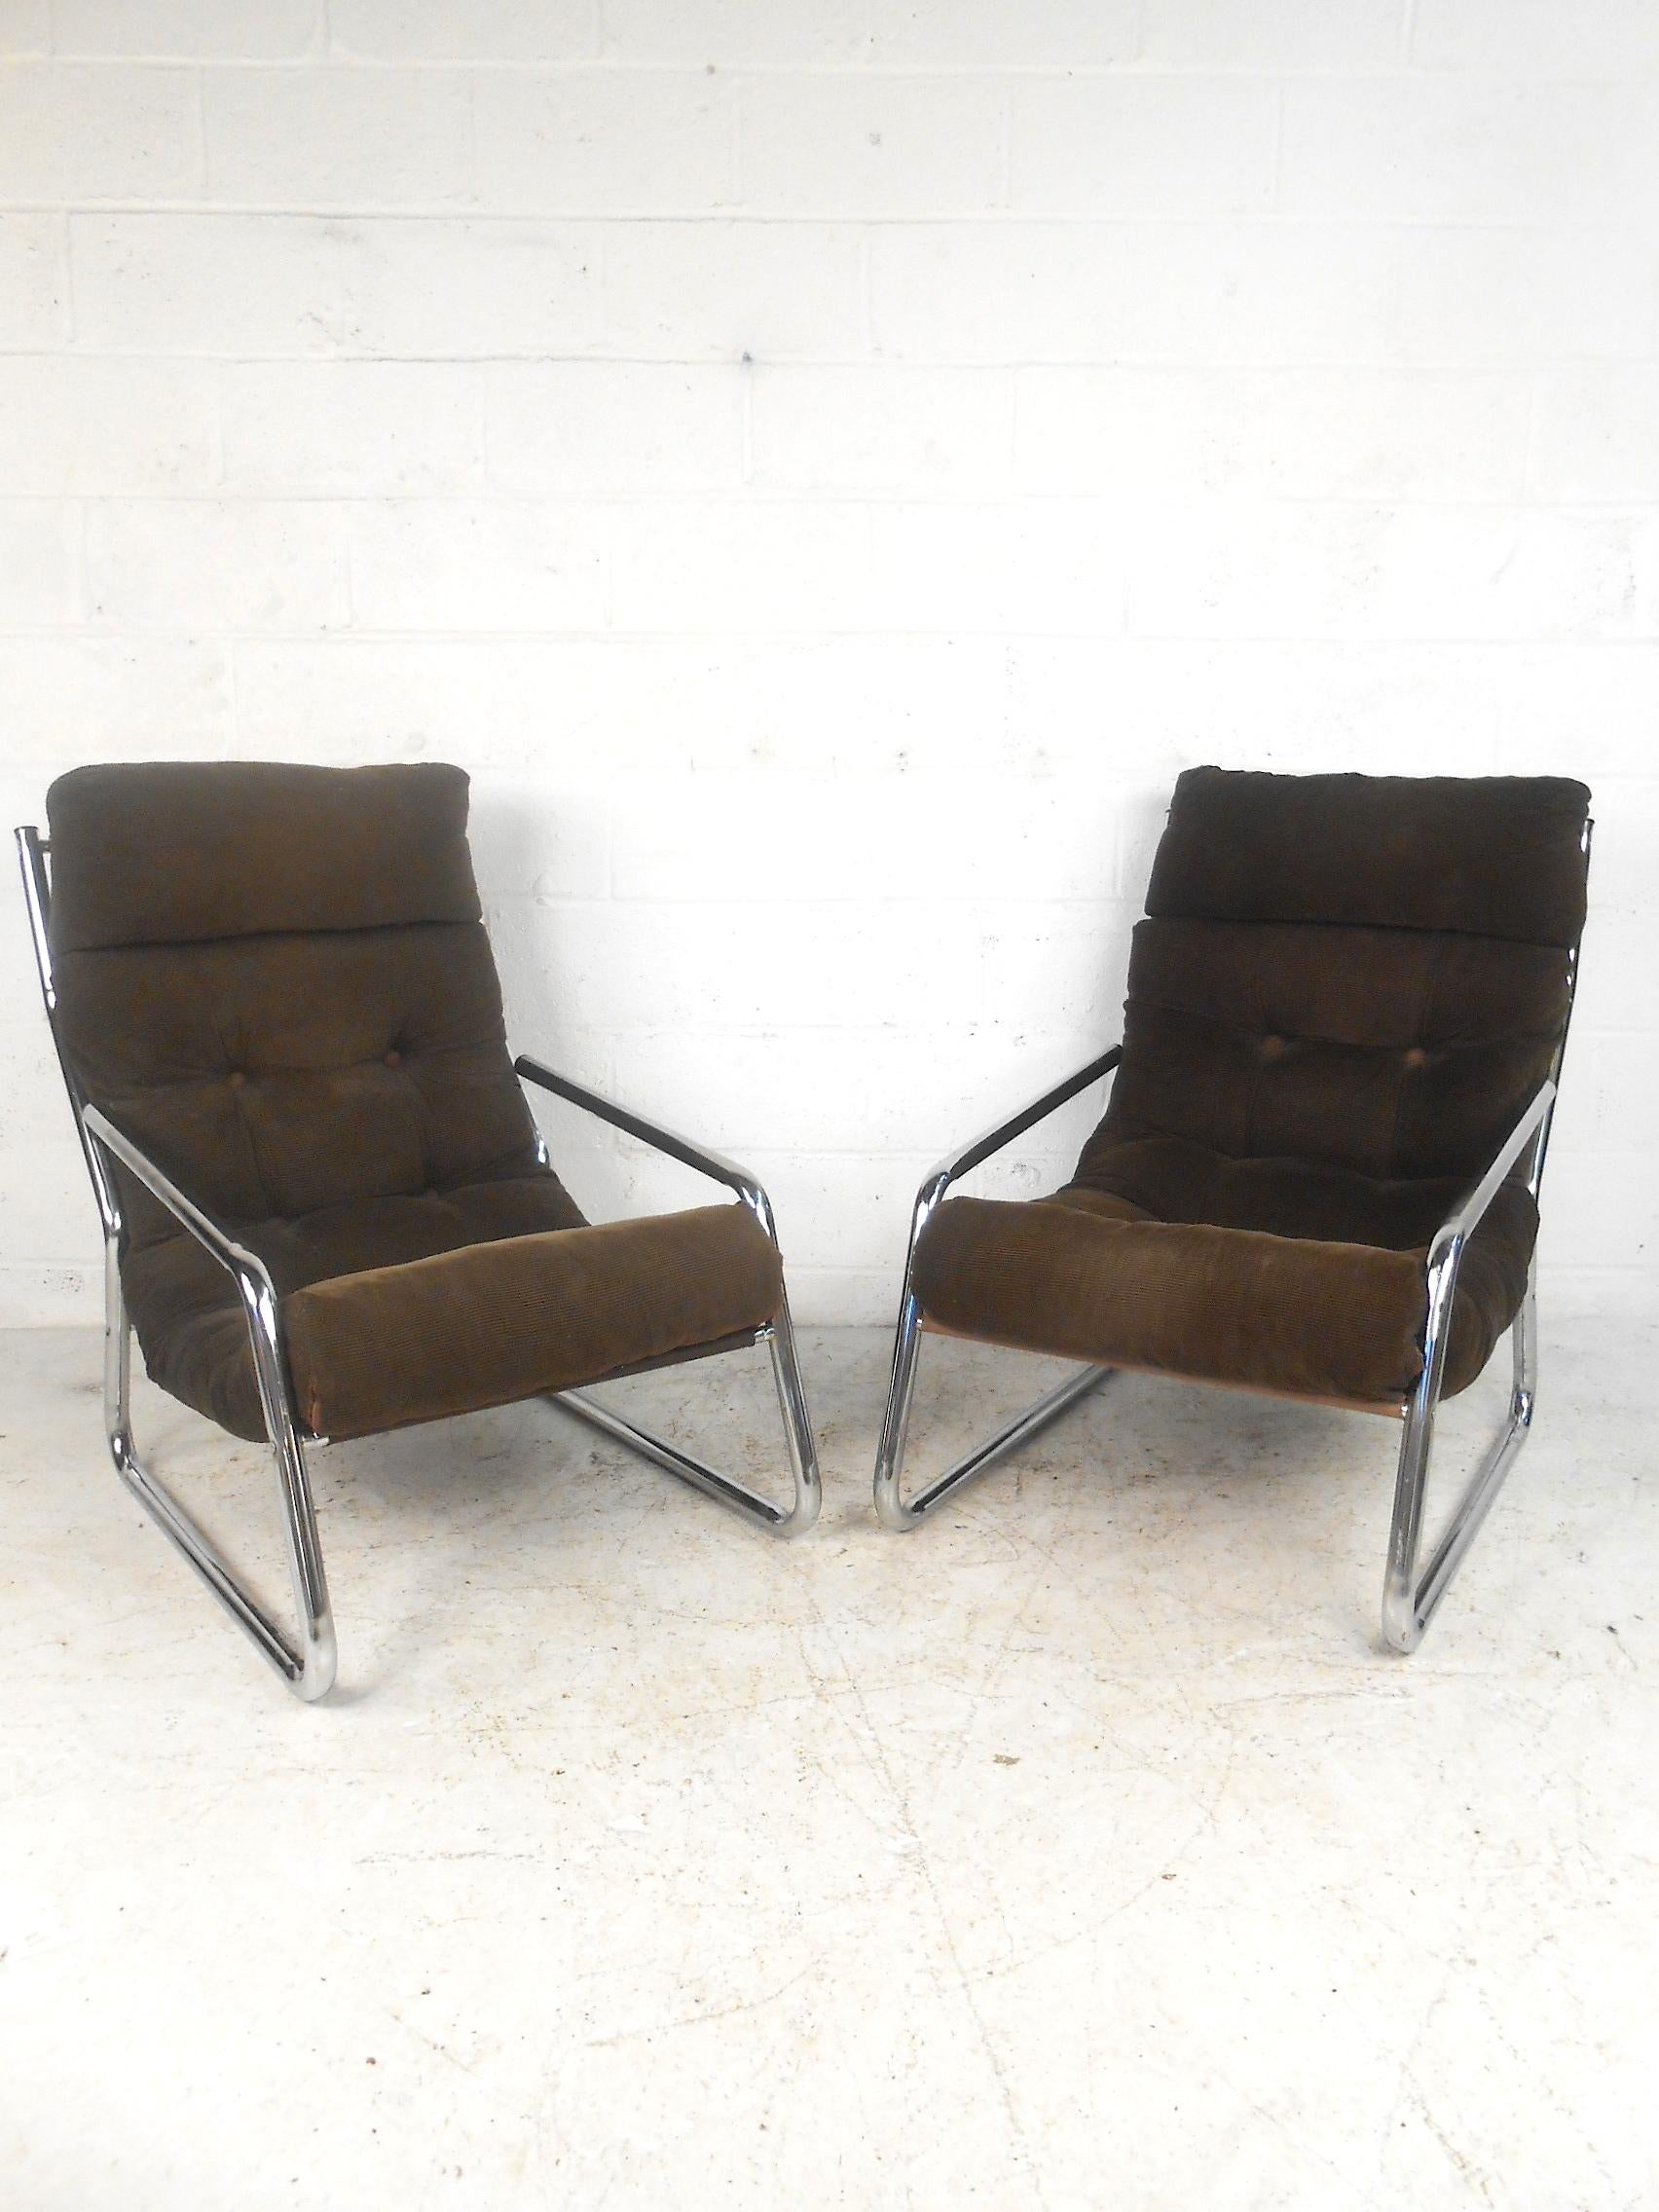 This set of midcentury chairs features plush ribbed upholstery creating an effortlessly comfortable seating option. With classic style and chrome accents, these pieces will fit in almost any modern space. Clean classic and comfortable. Please